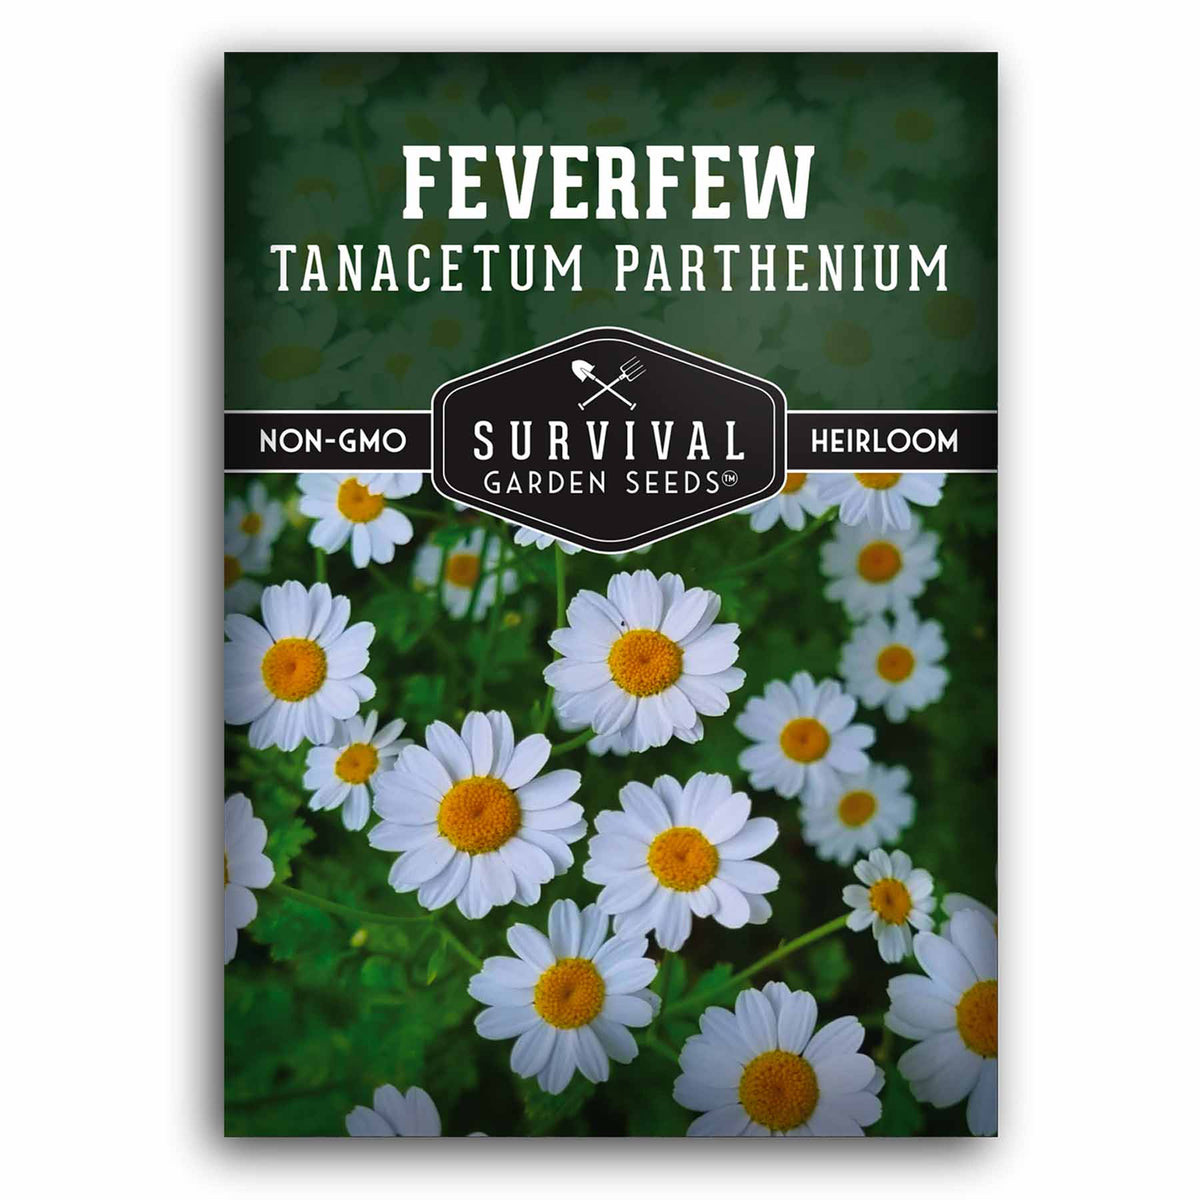 1 packet of Feverfew seeds